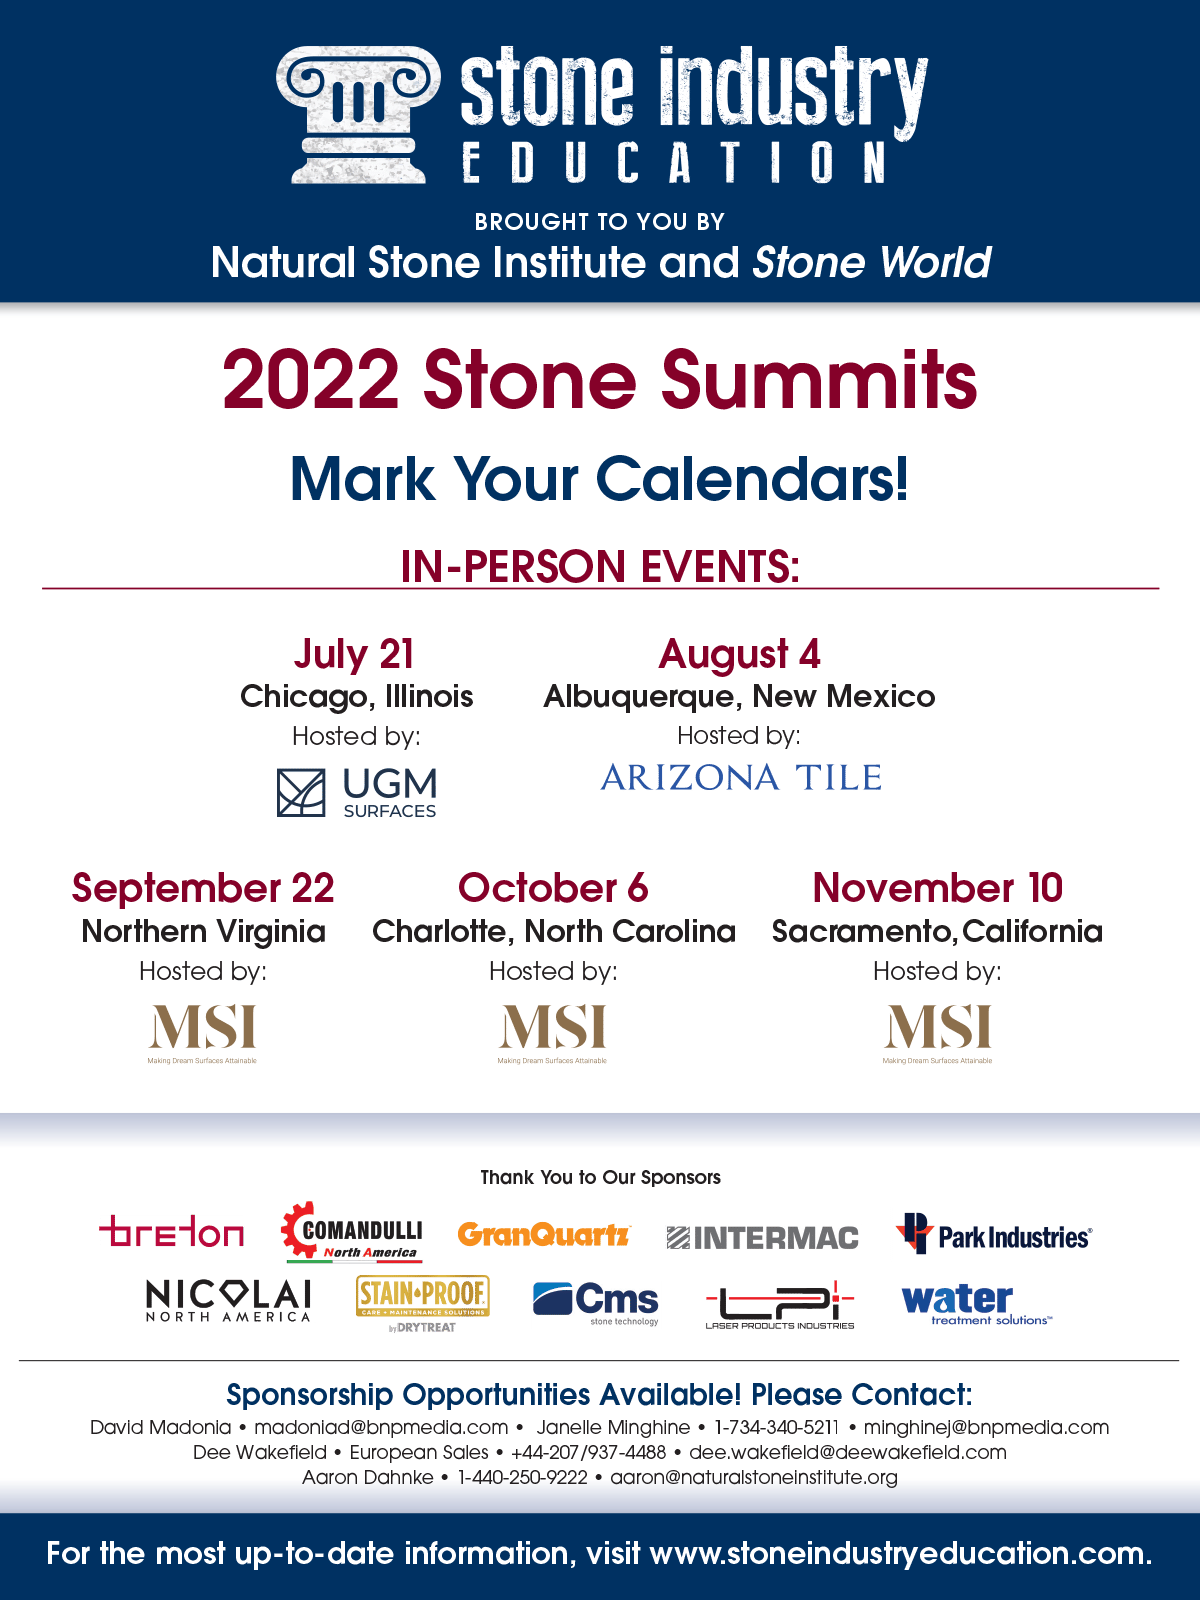 Natural Stone Institute, Stone Industry Education, Stone World